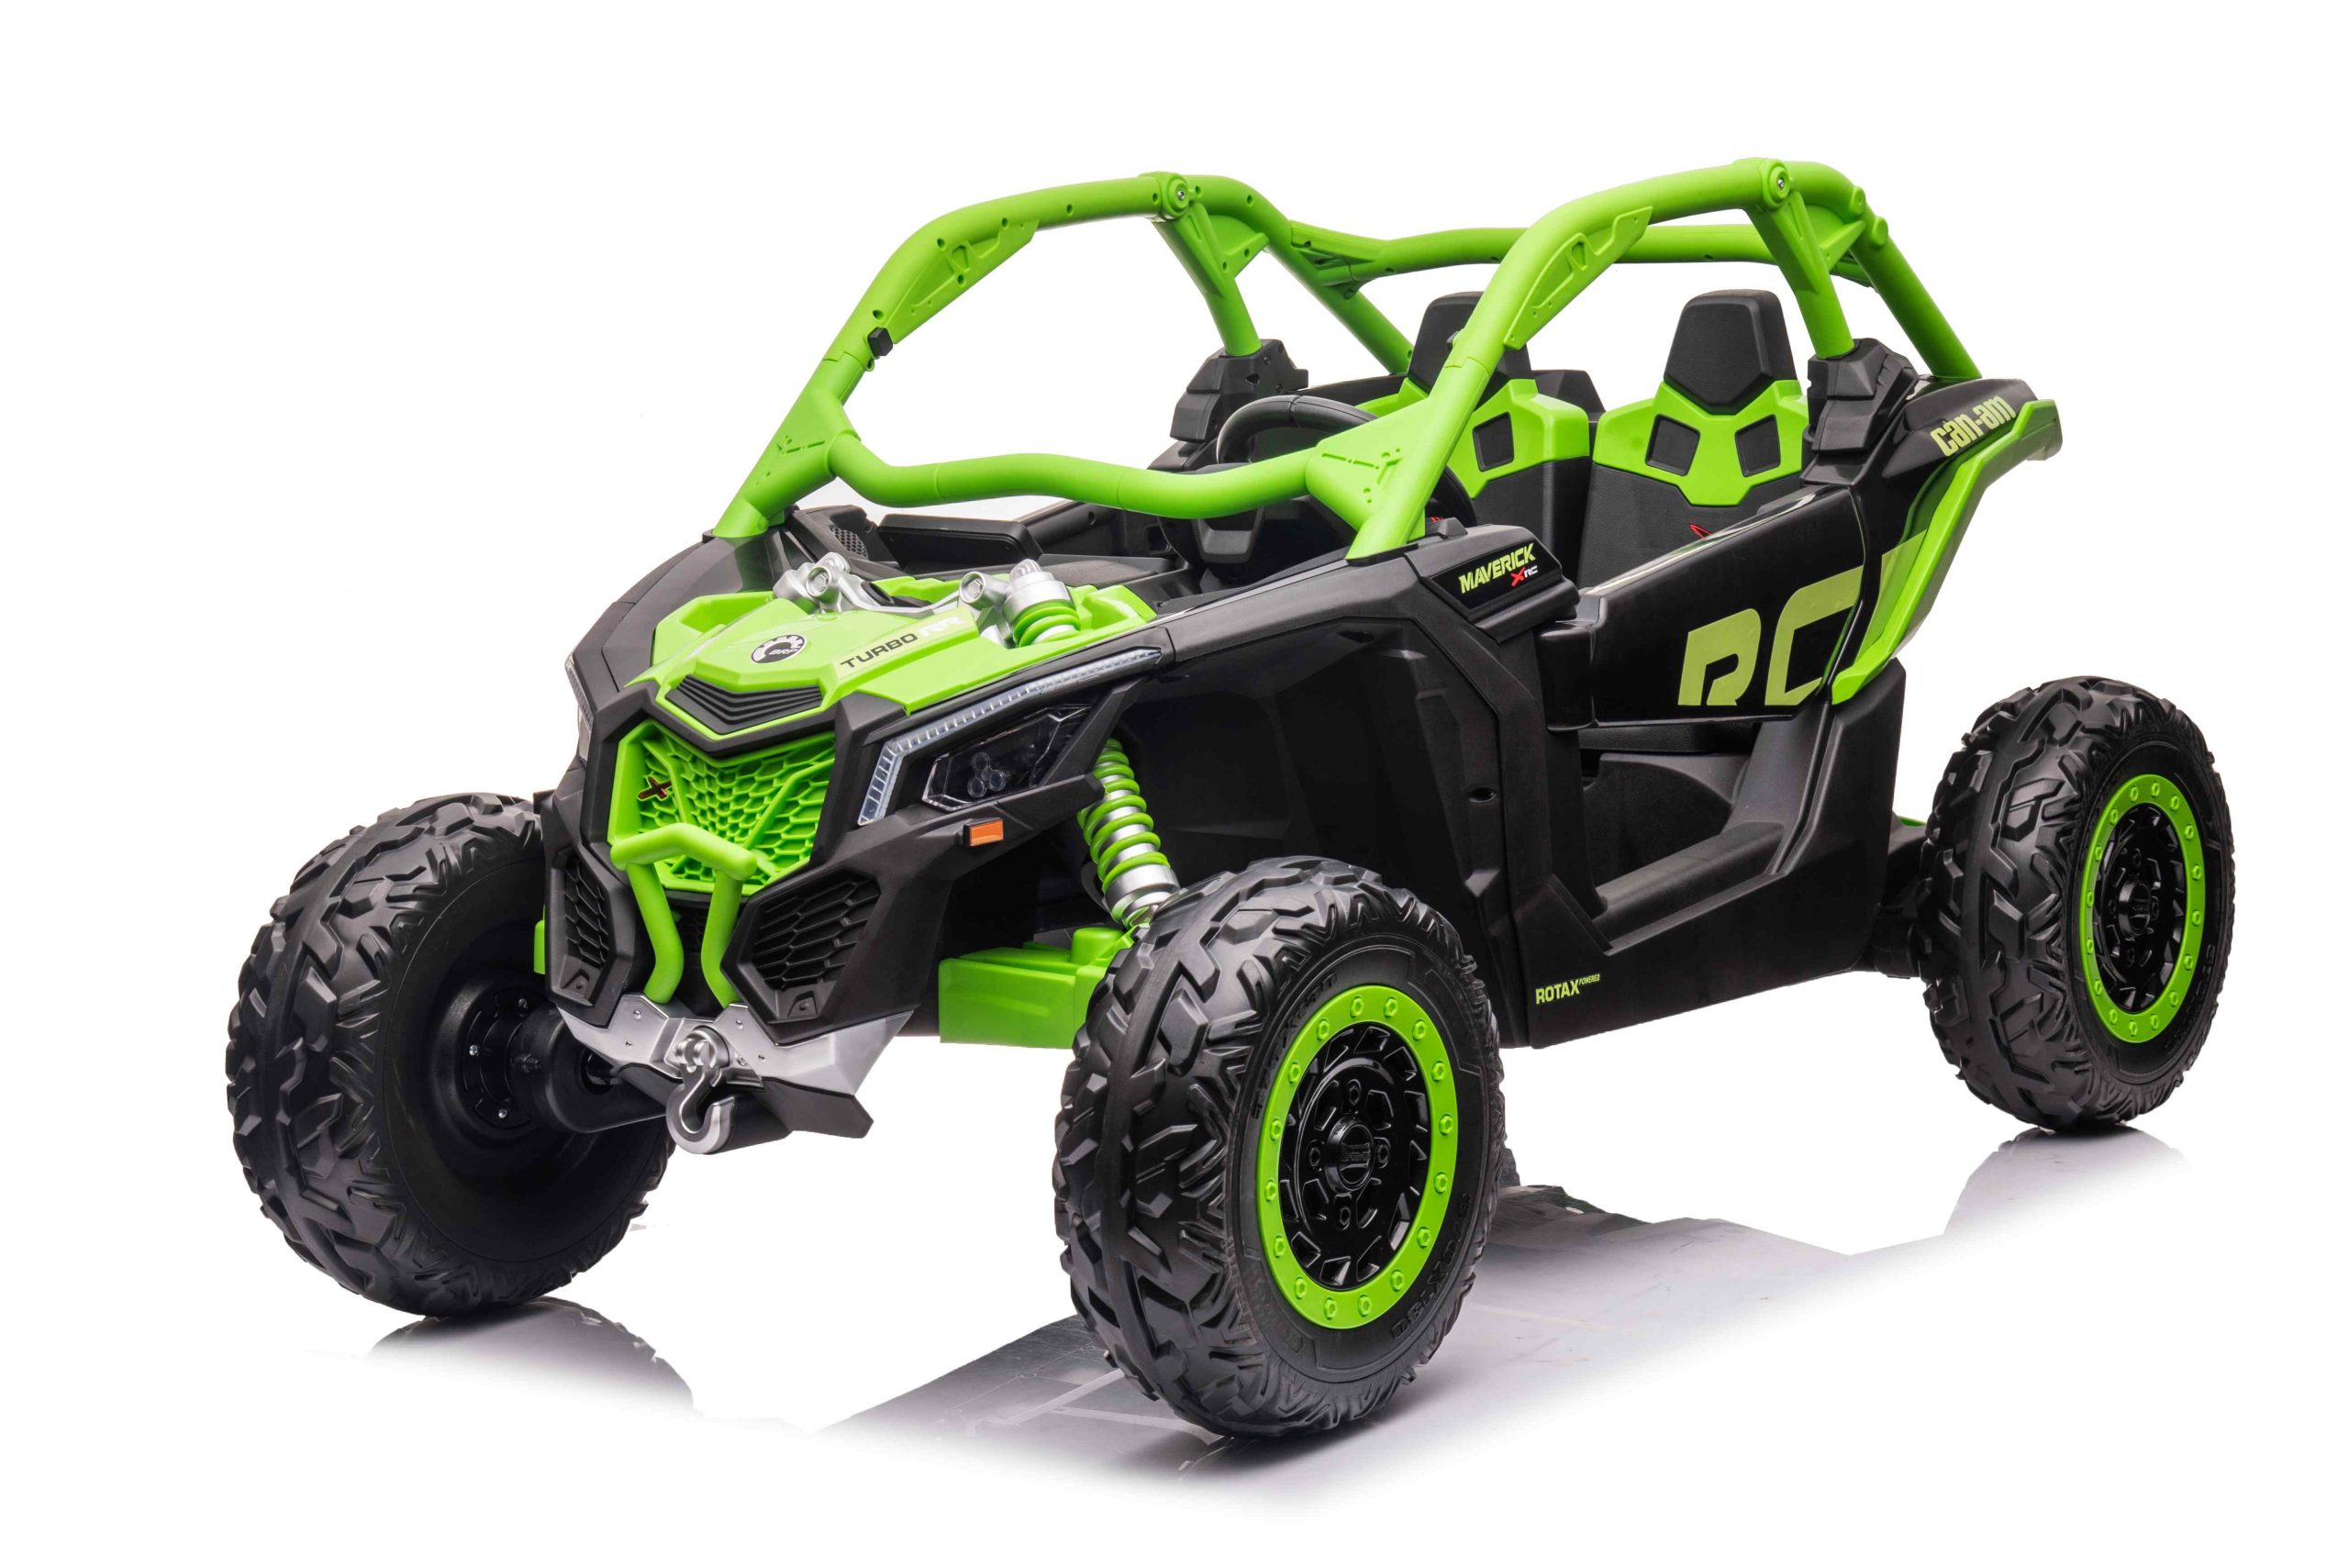 Can-Am Maverick X3 Bench Seat, Comfort And Style Upgrade